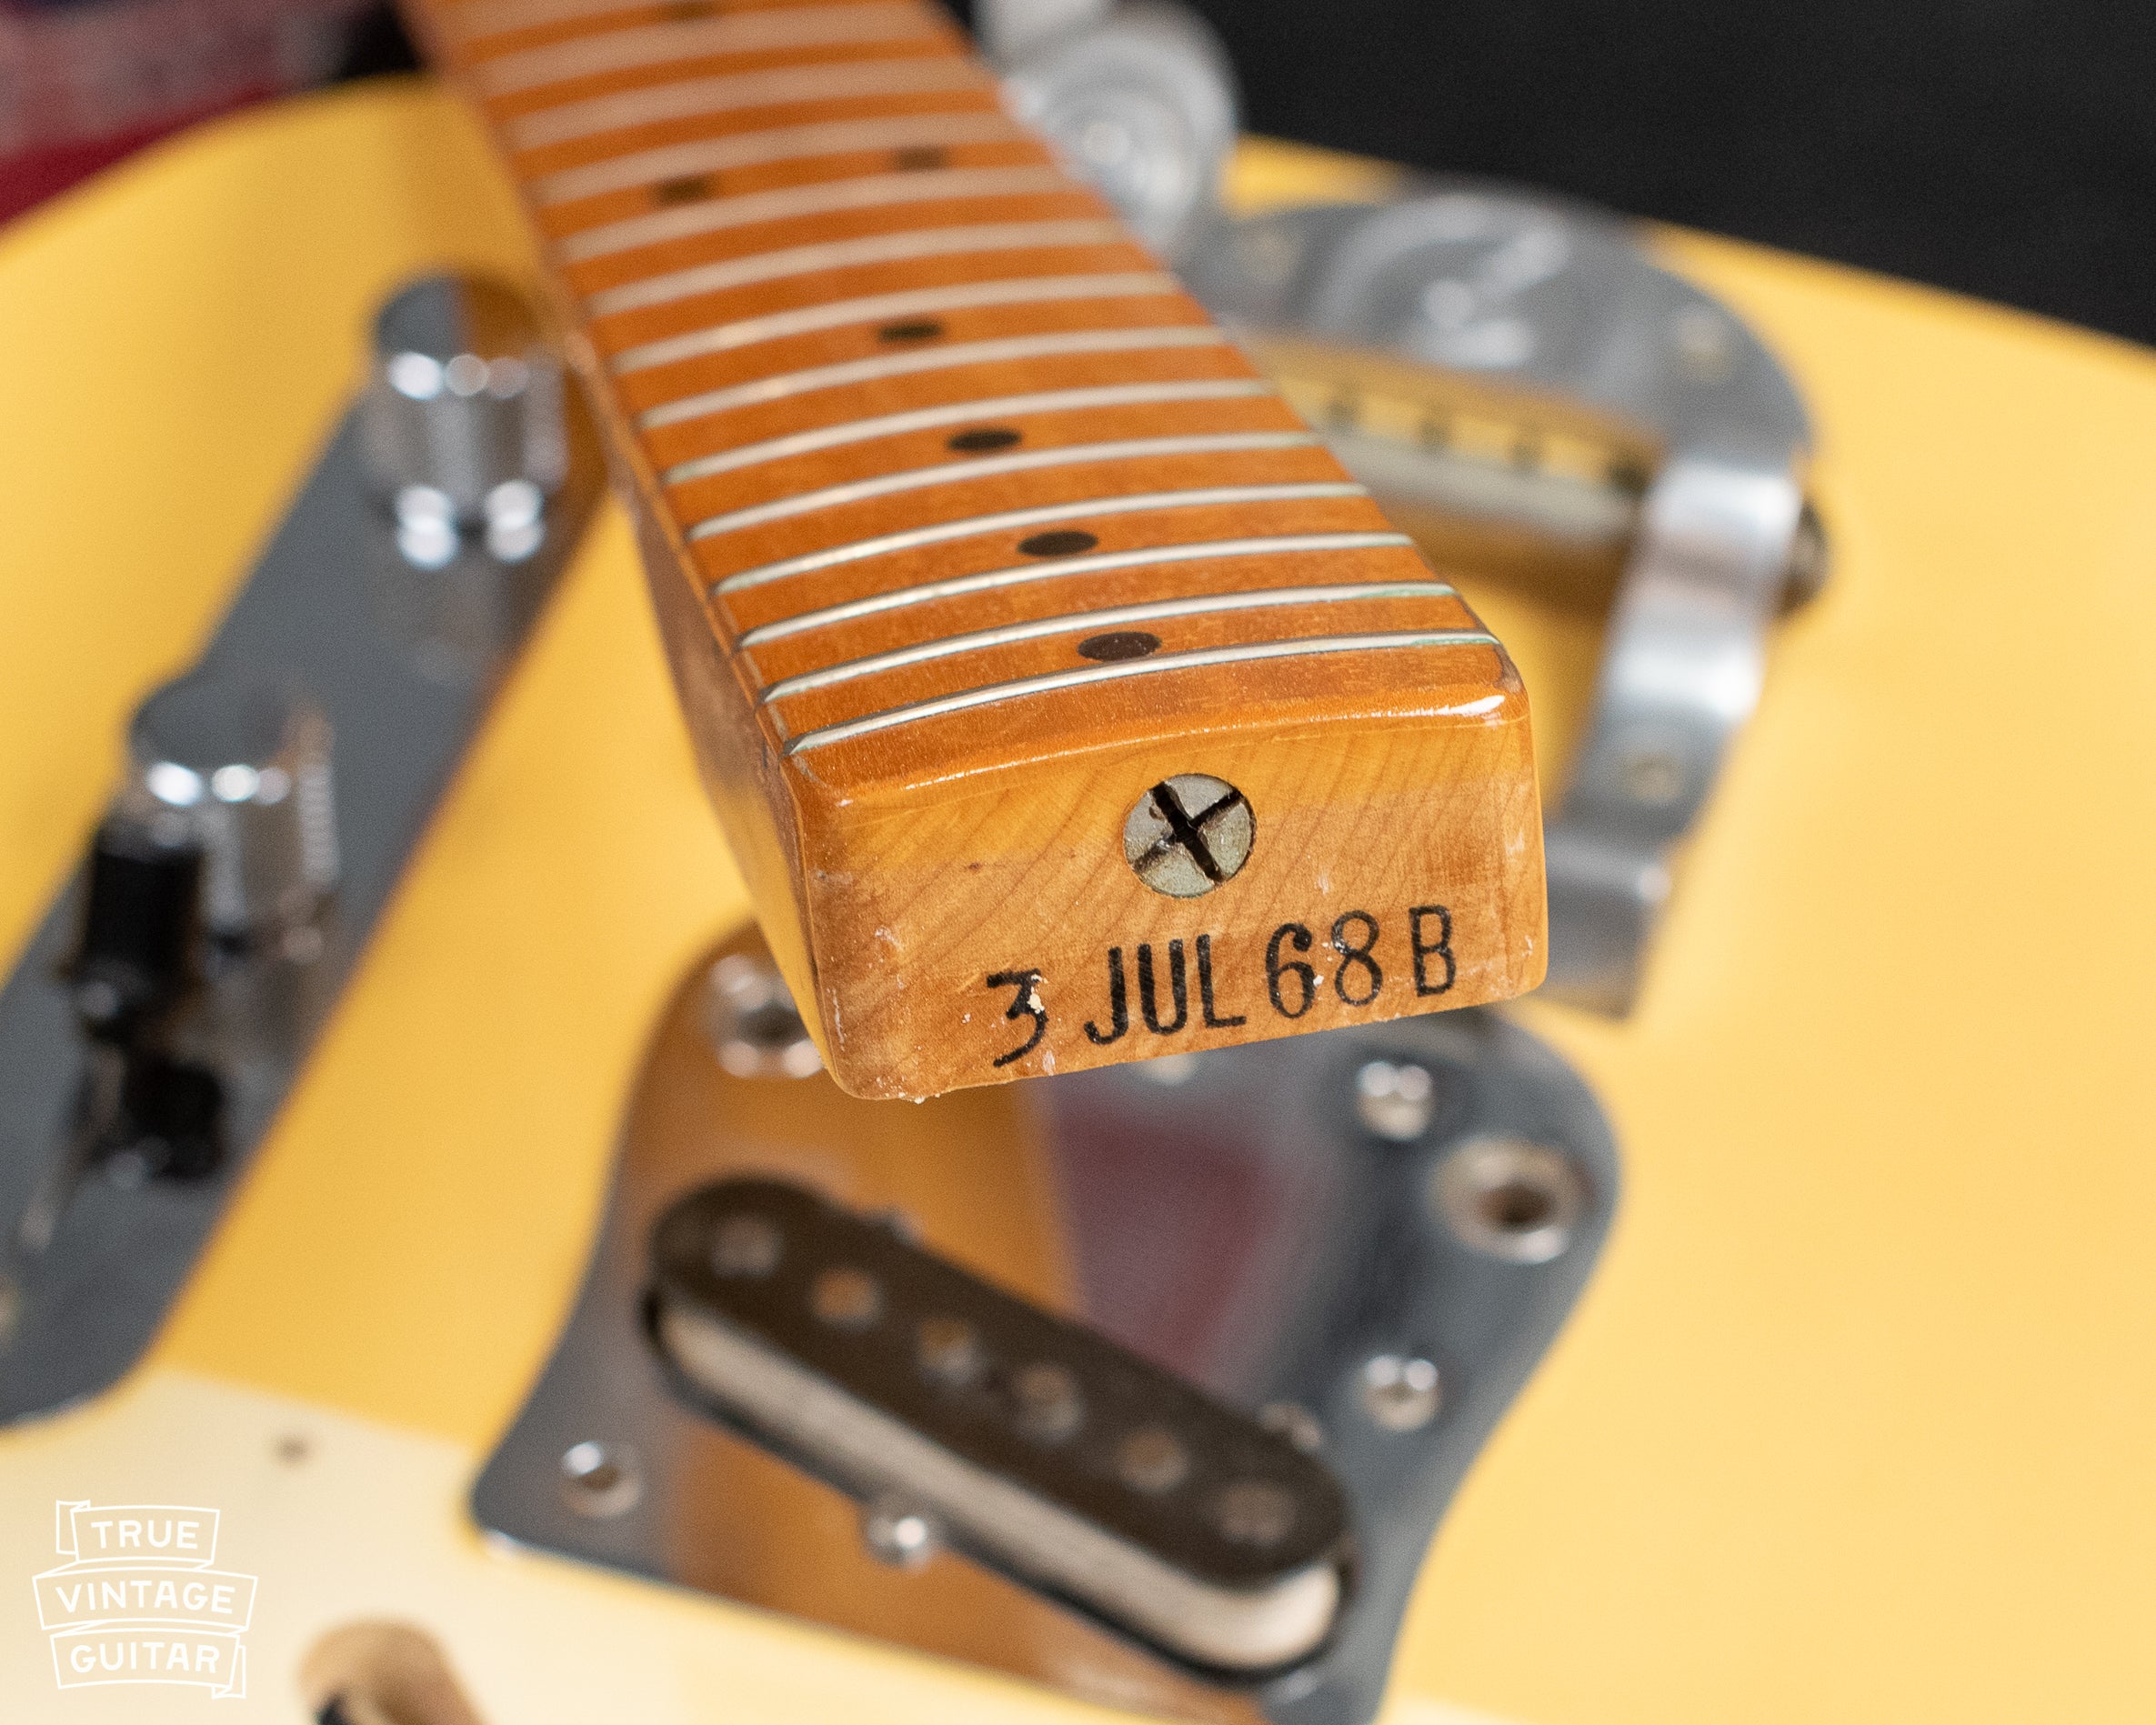 How to date Fender Telecaster vintage 1960s 1950s